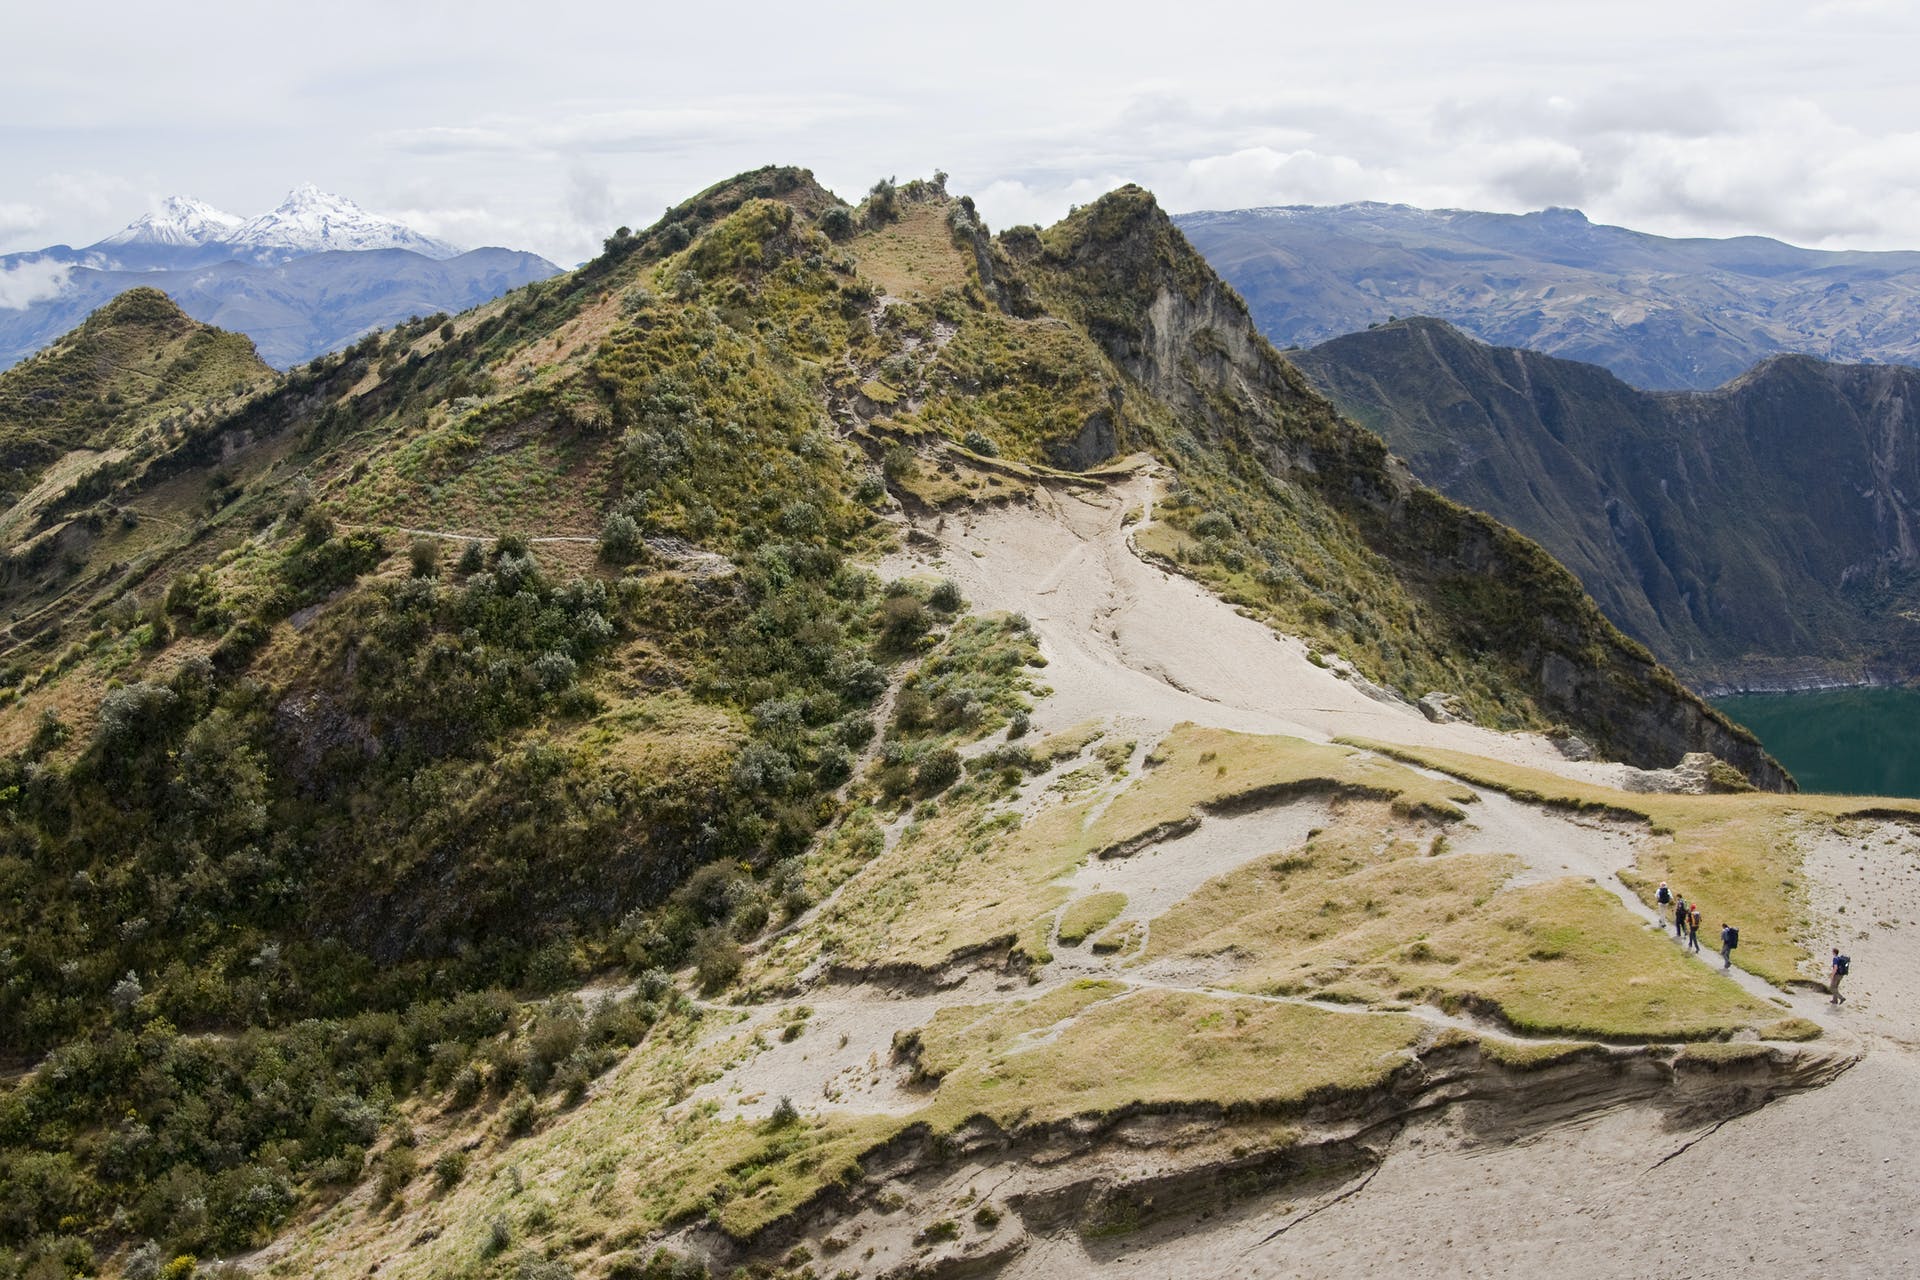 A beautiful hiking trail through the volcanic peaks and paramos of the Andean mountains.